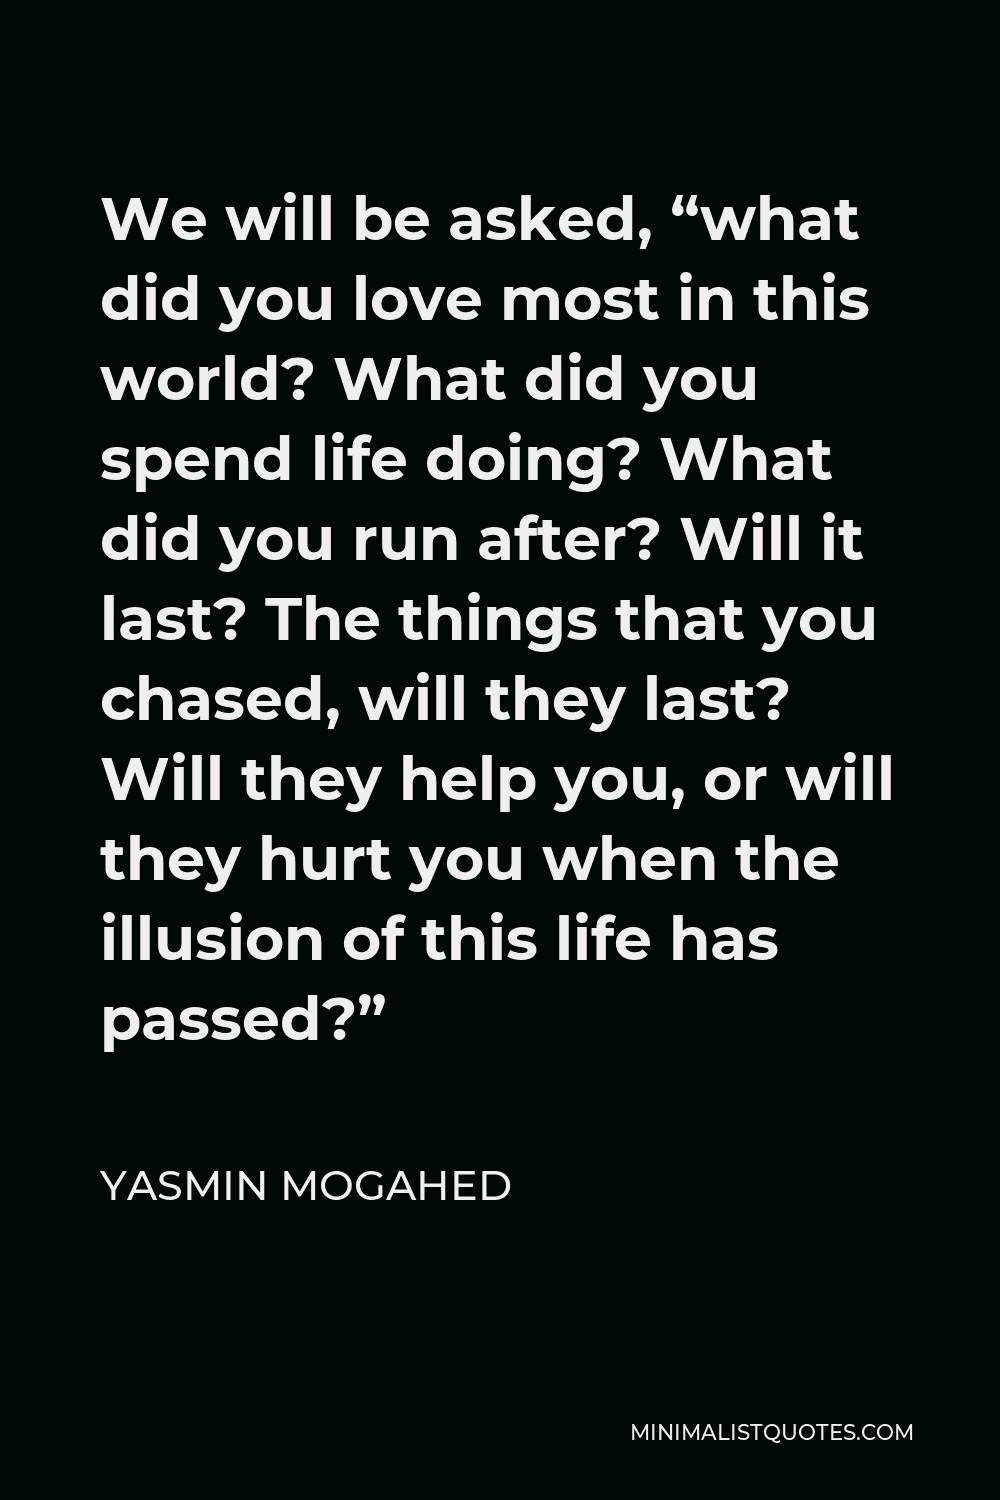 Yasmin Mogahed Quote - We will be asked, “what did you love most in this world? What did you spend life doing? What did you run after? Will it last? The things that you chased, will they last? Will they help you, or will they hurt you when the illusion of this life has passed?”